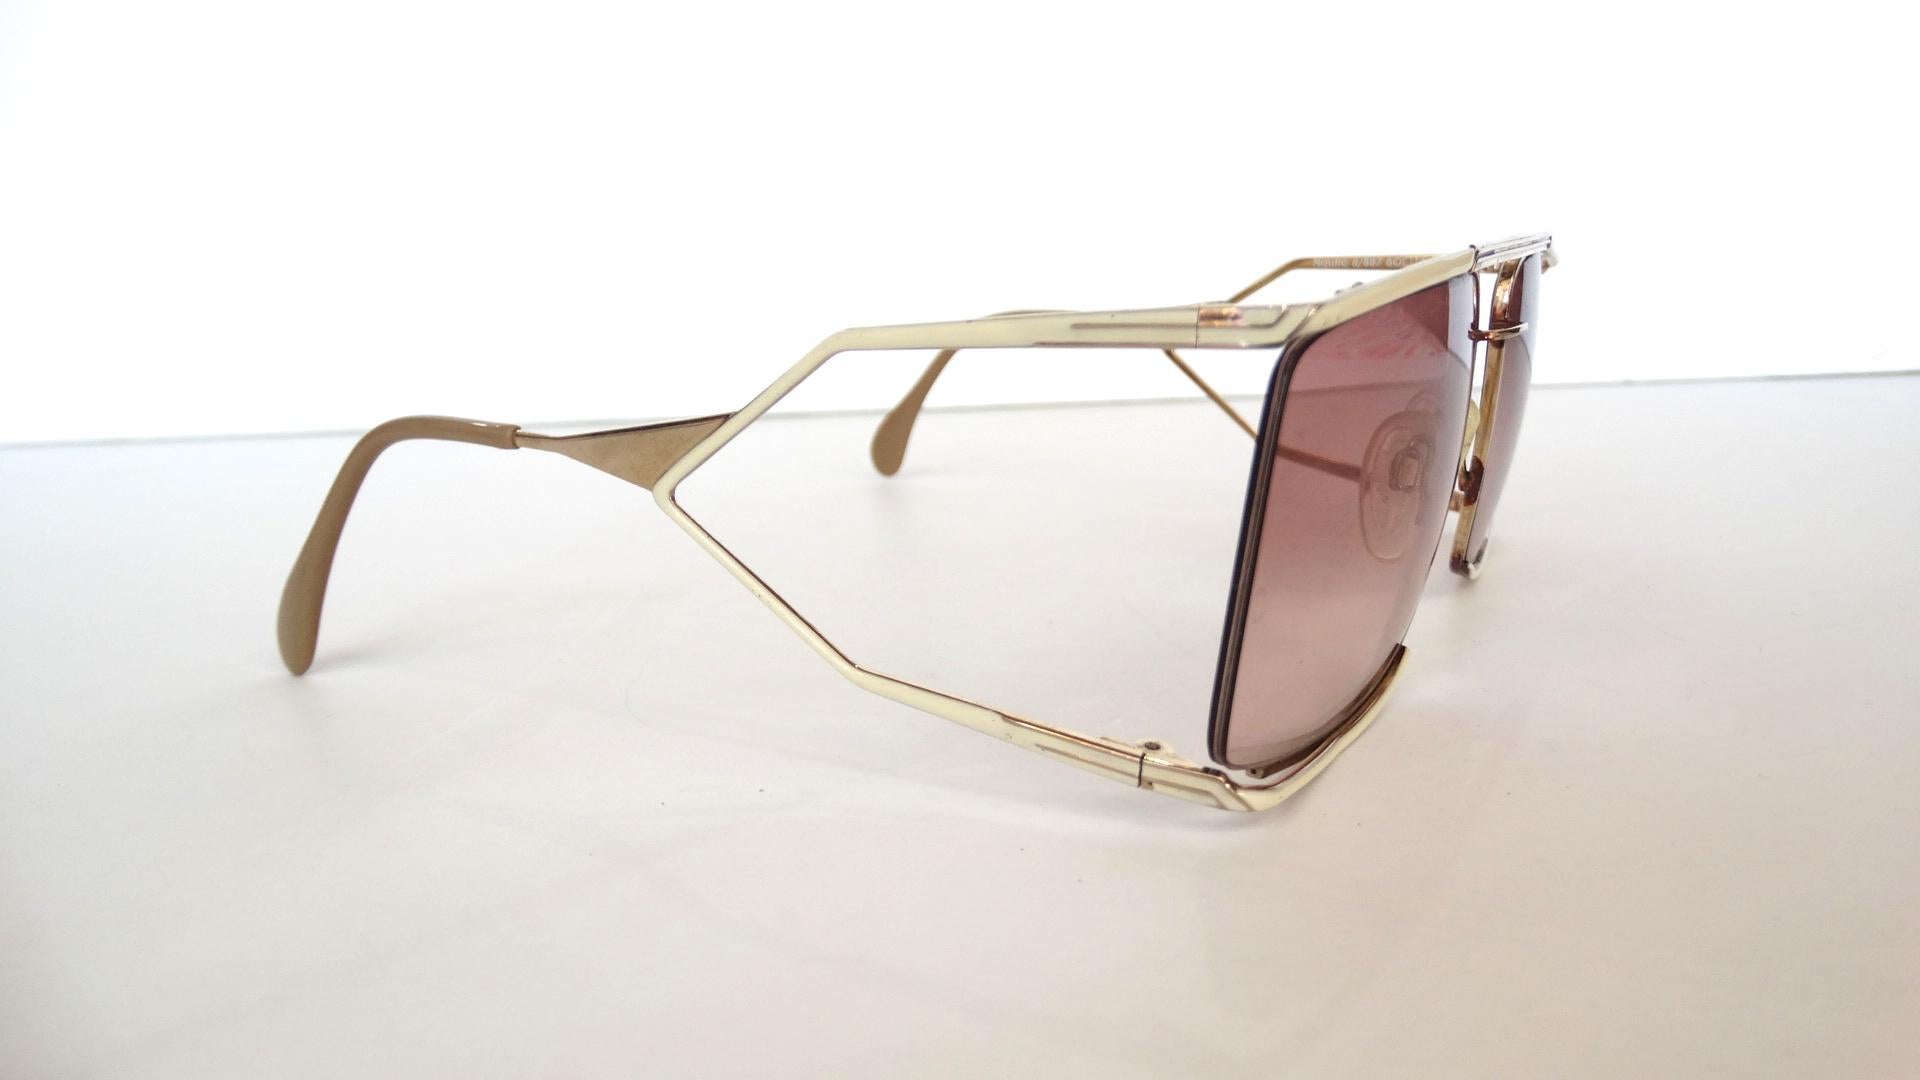 Elevate Your Look With These Amazing Sunglasses! Circa 1980s, these oversized sunglasses are designed by the iconic 60s brand Neostyle. Features silver hardware and a painted white outer frame. Small silver accent lines are featured on the sides of